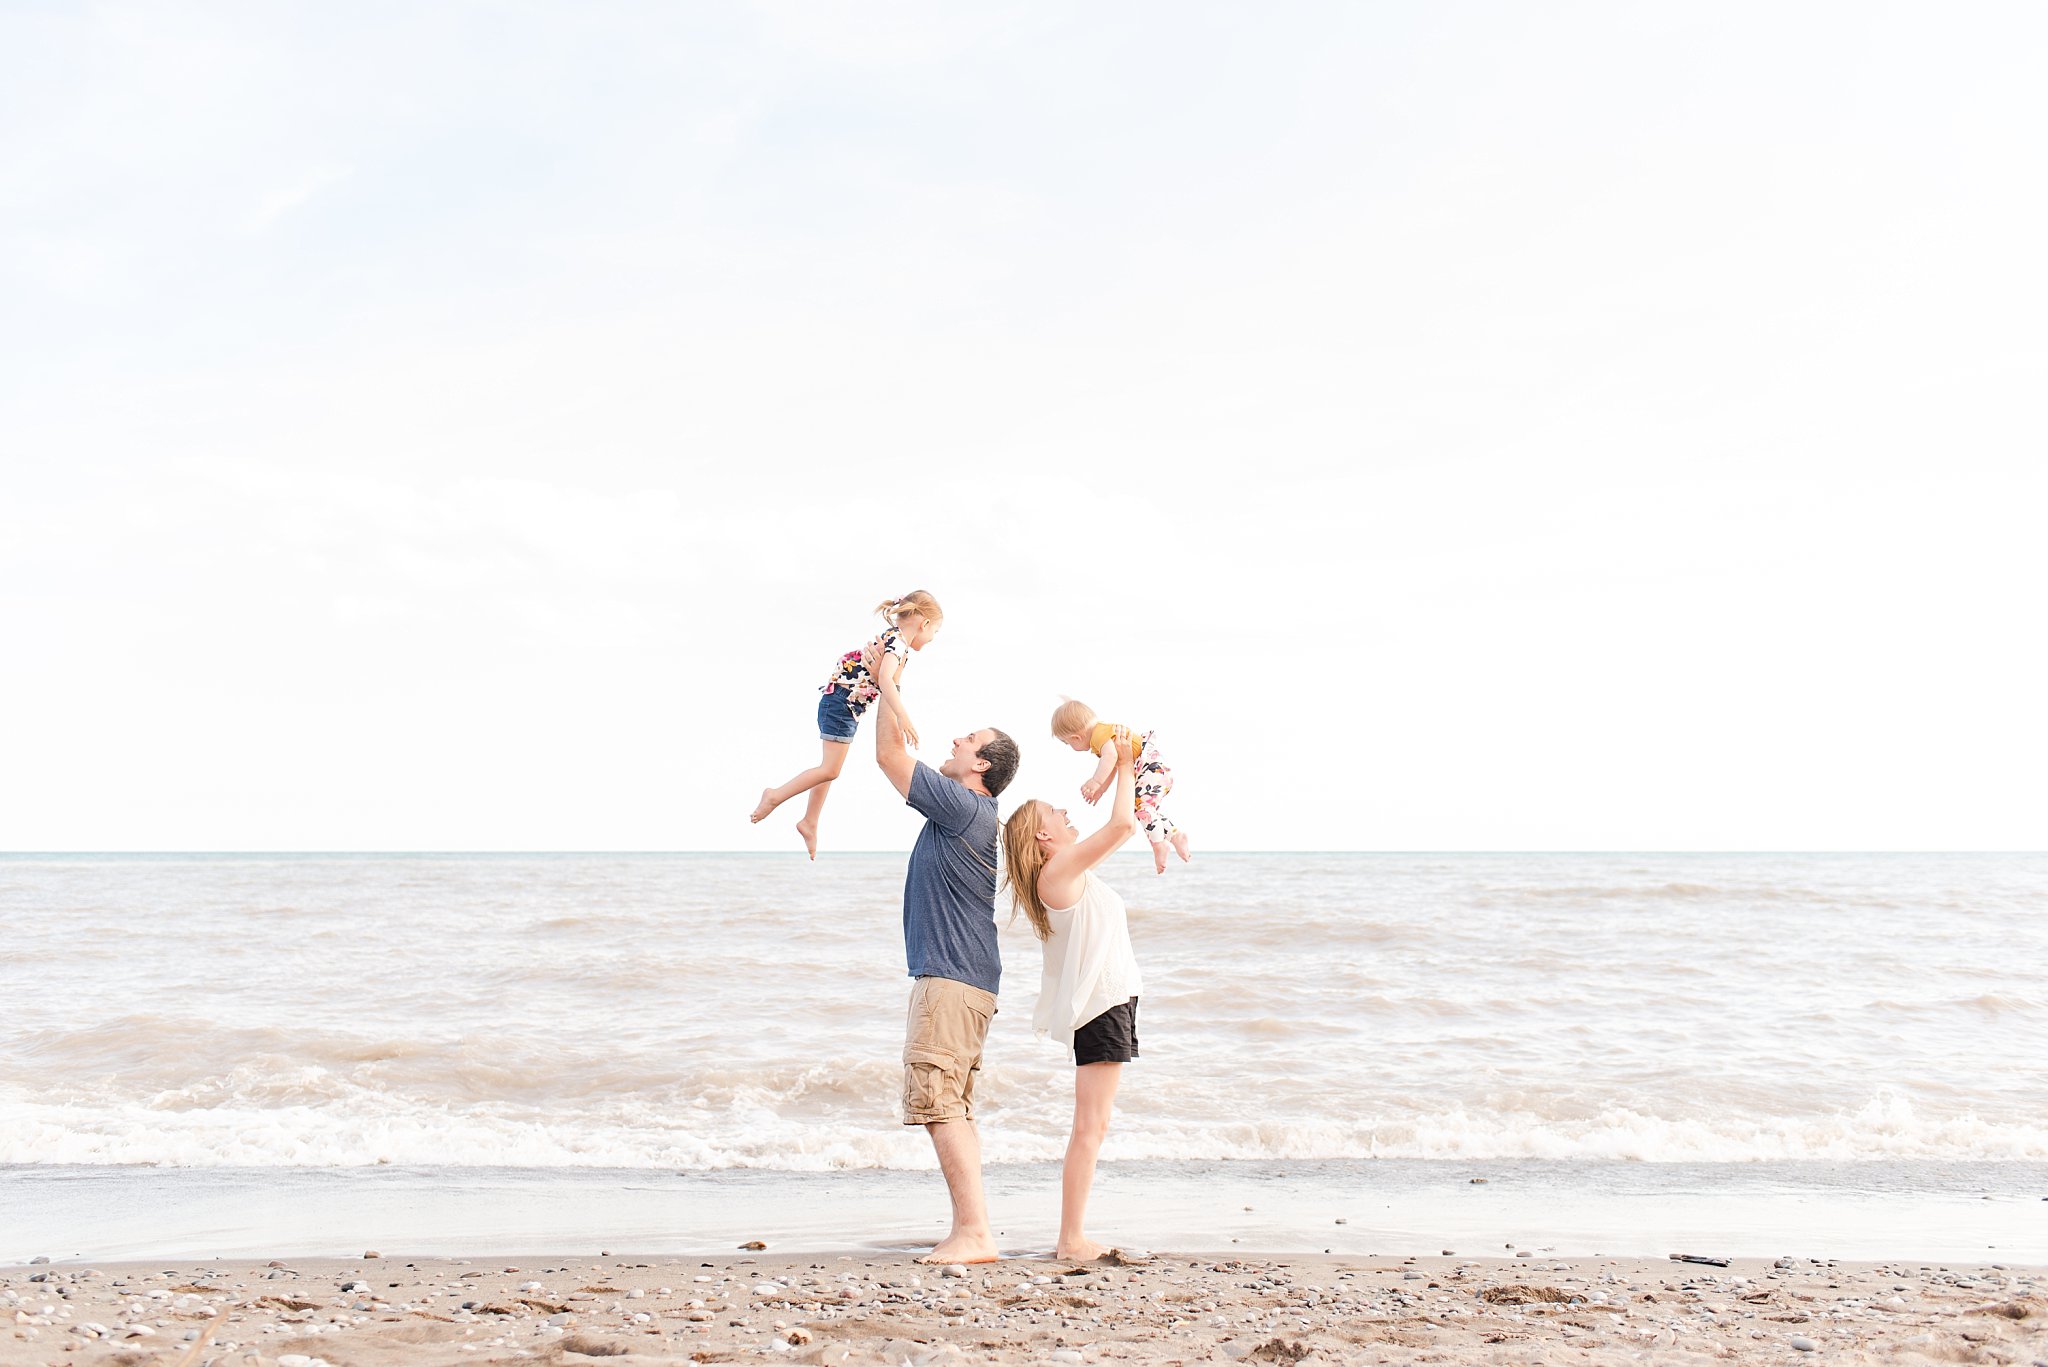 family photography london ontario. two parents stand back-to-back and lift their daughters up into the air. they're standing on sand at the beach with waves splashing on the shore behind them, and a soft blue sky in the distance.